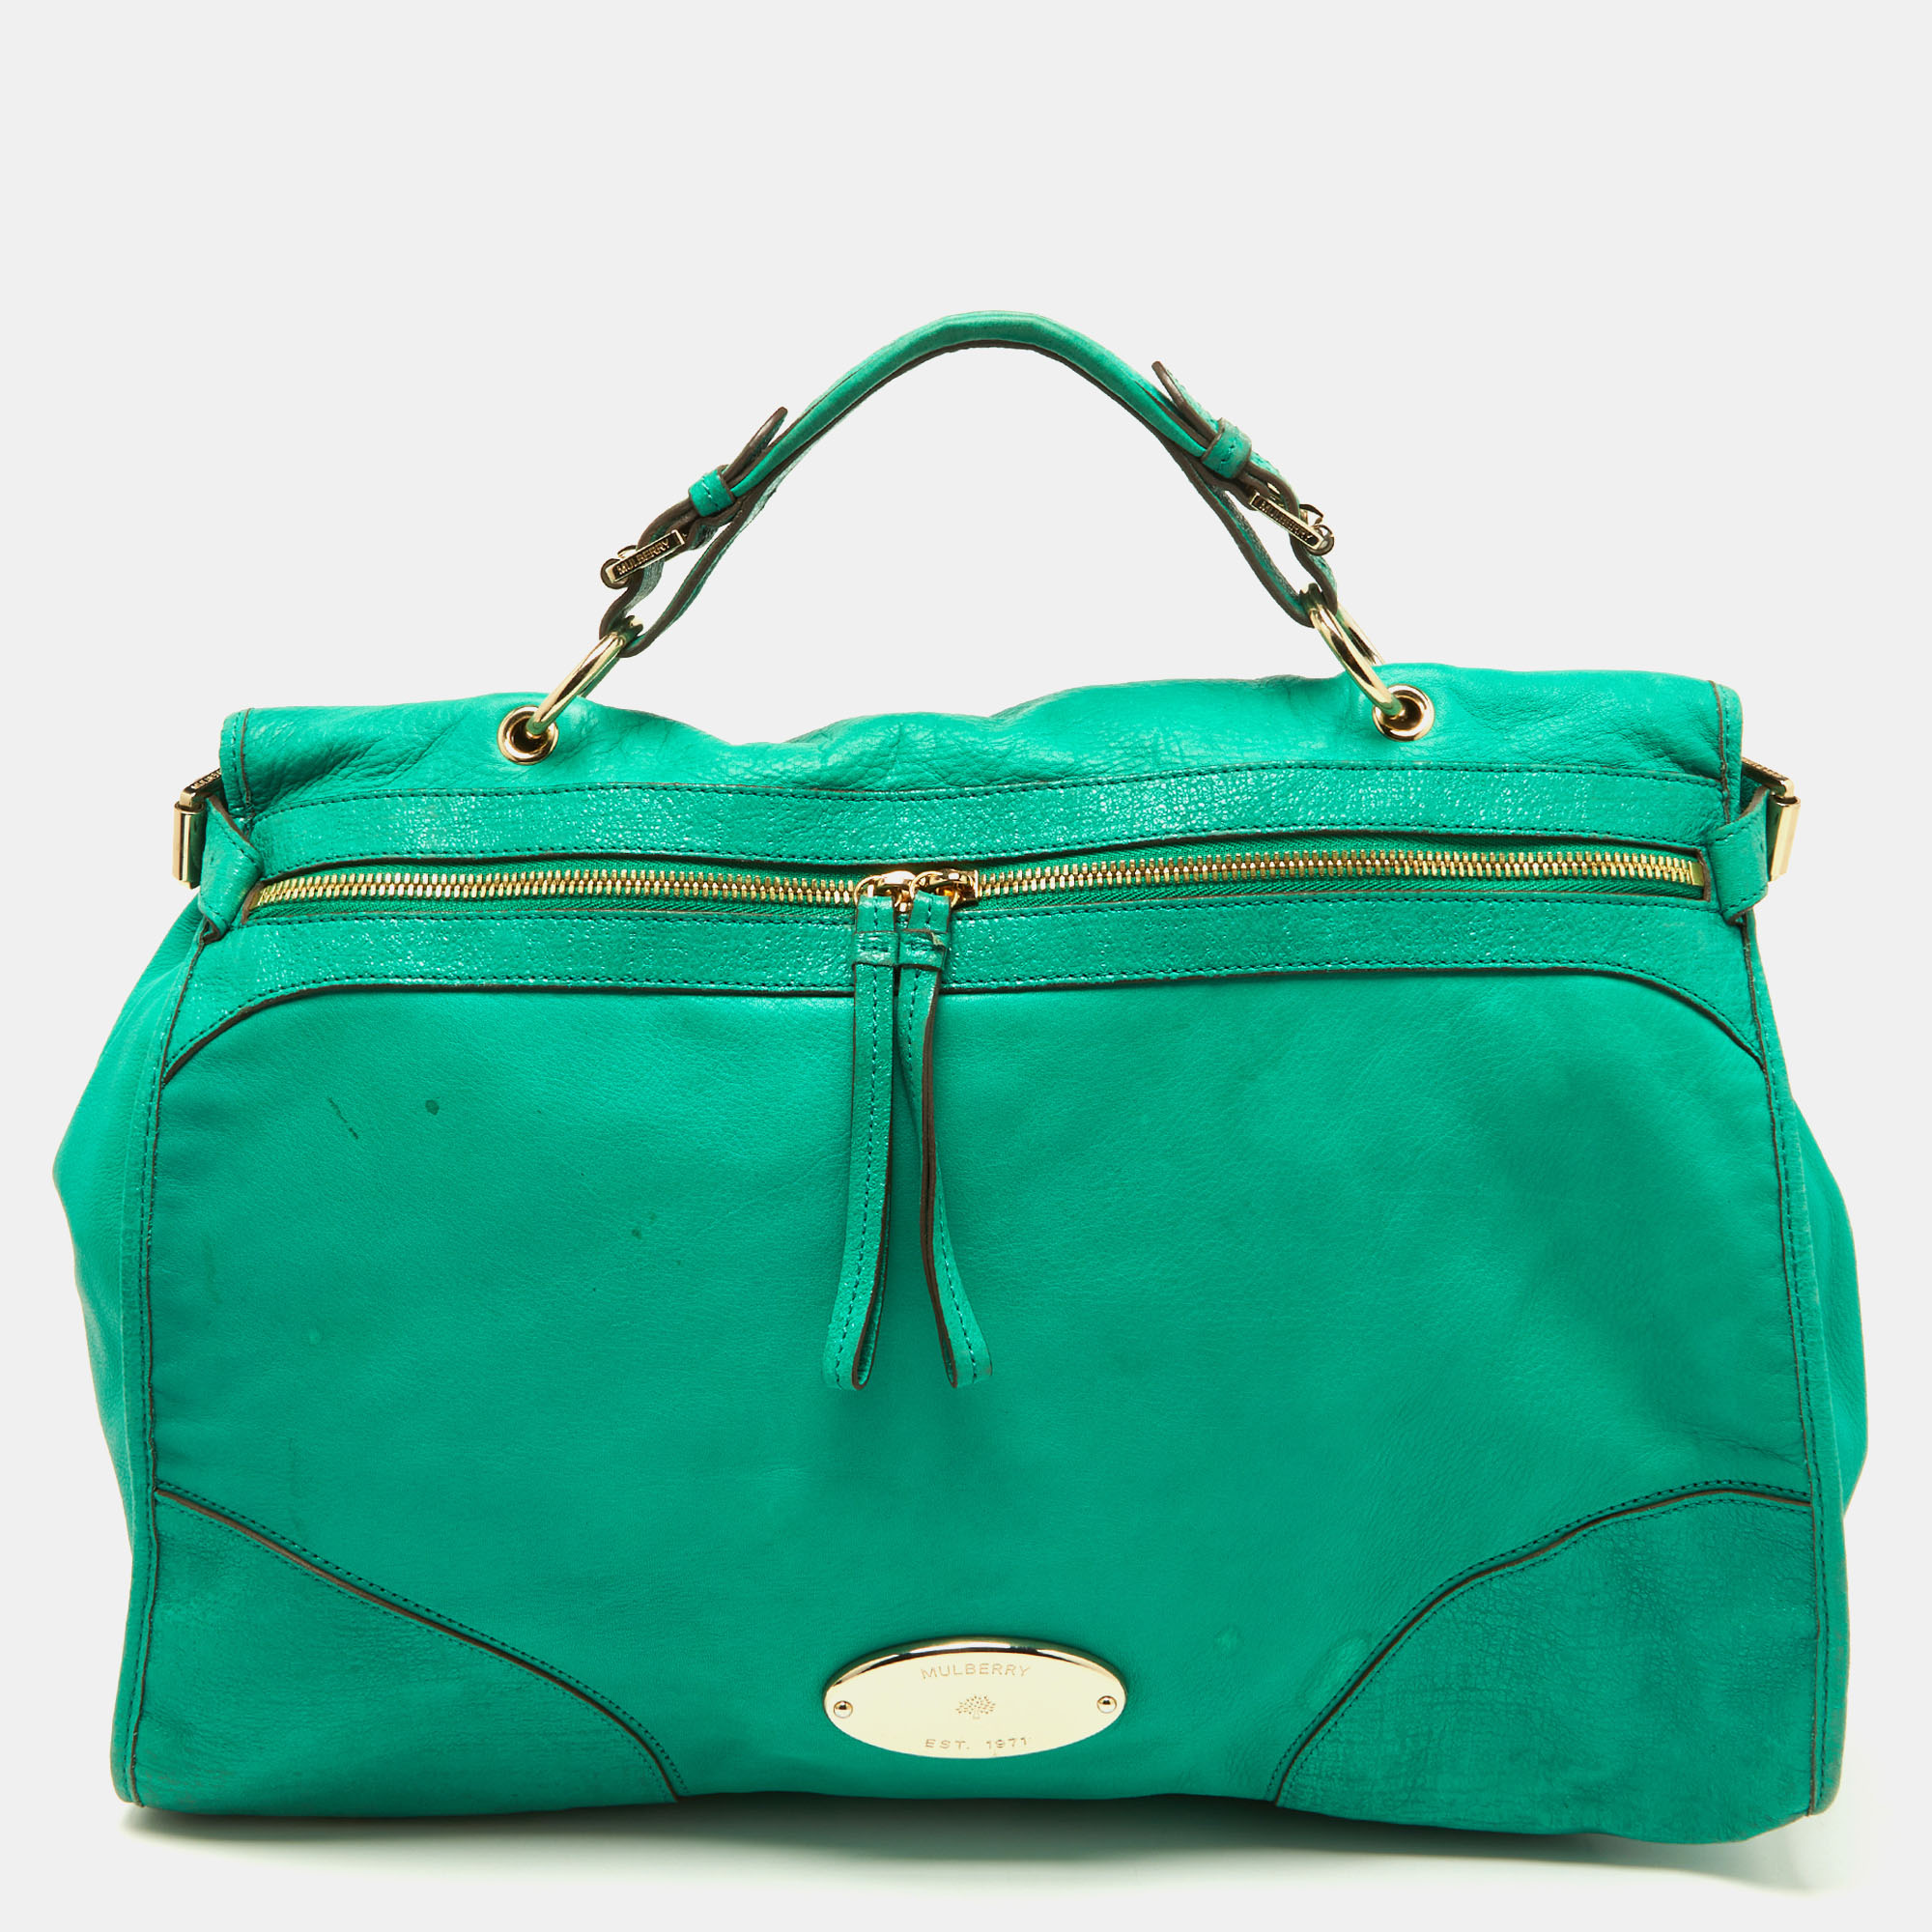 Mulberry green leather taylor top handle bag